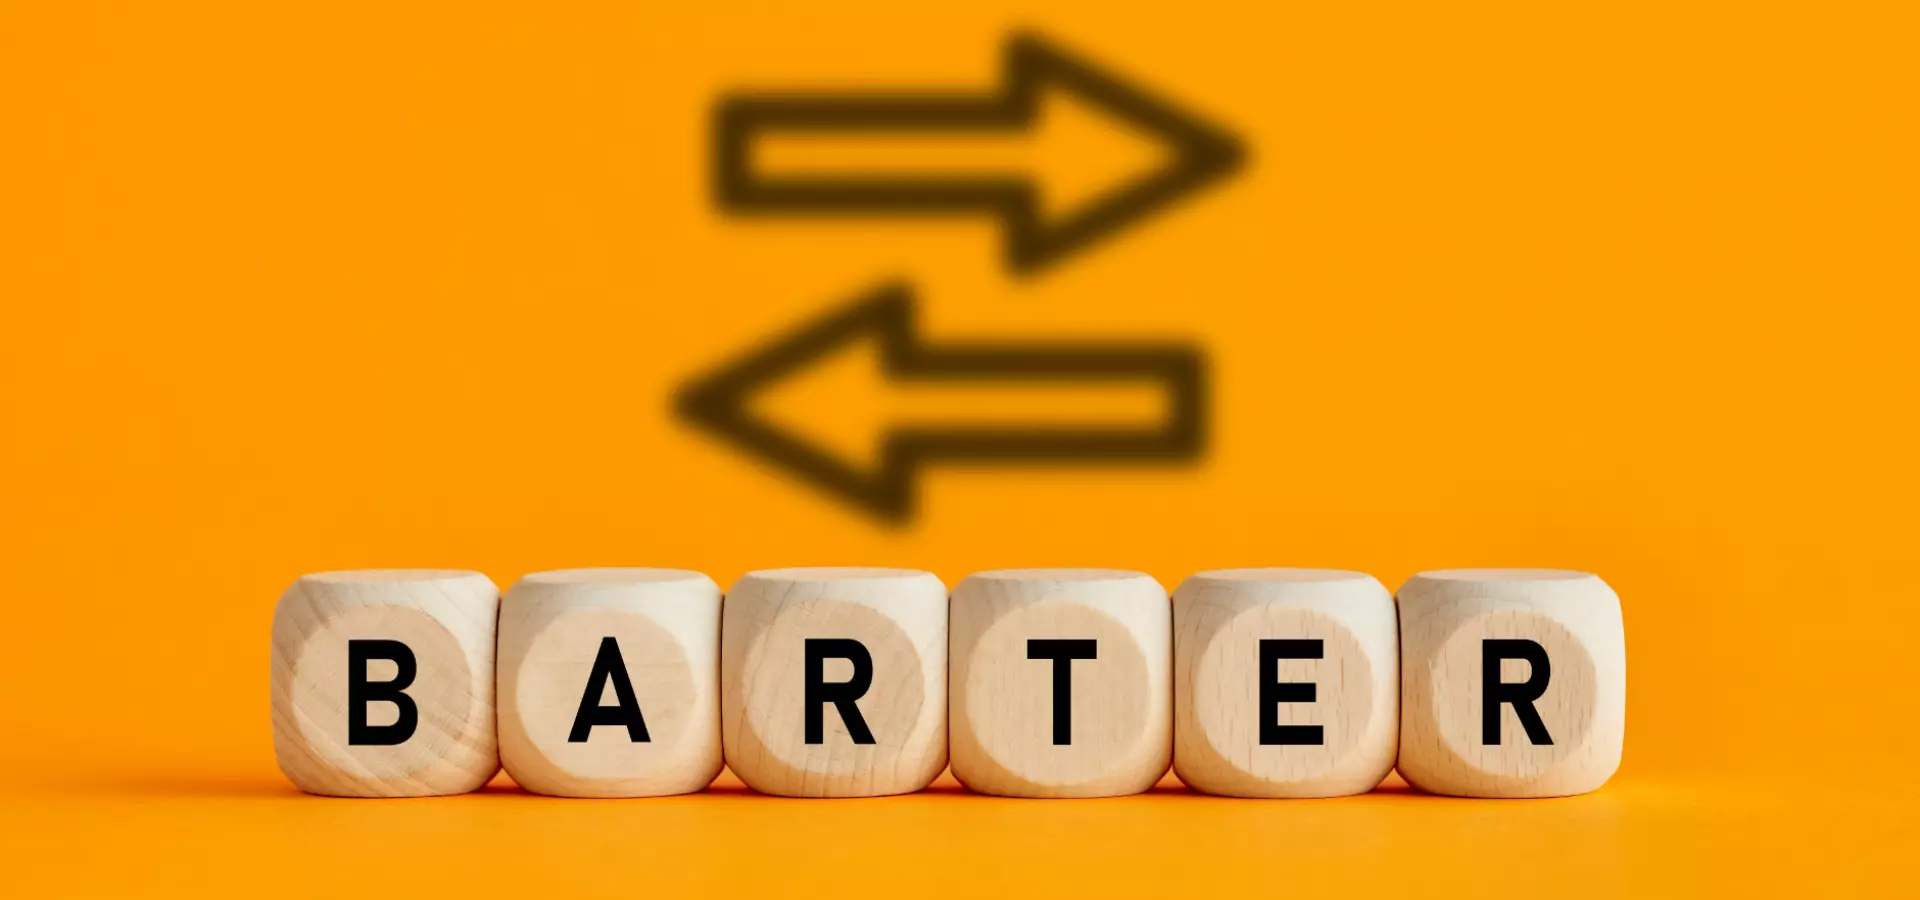 Wooden cubes with the letters spelling 'barter' in front of a yellow background, and two arrows (one pointing left and one pointing right).